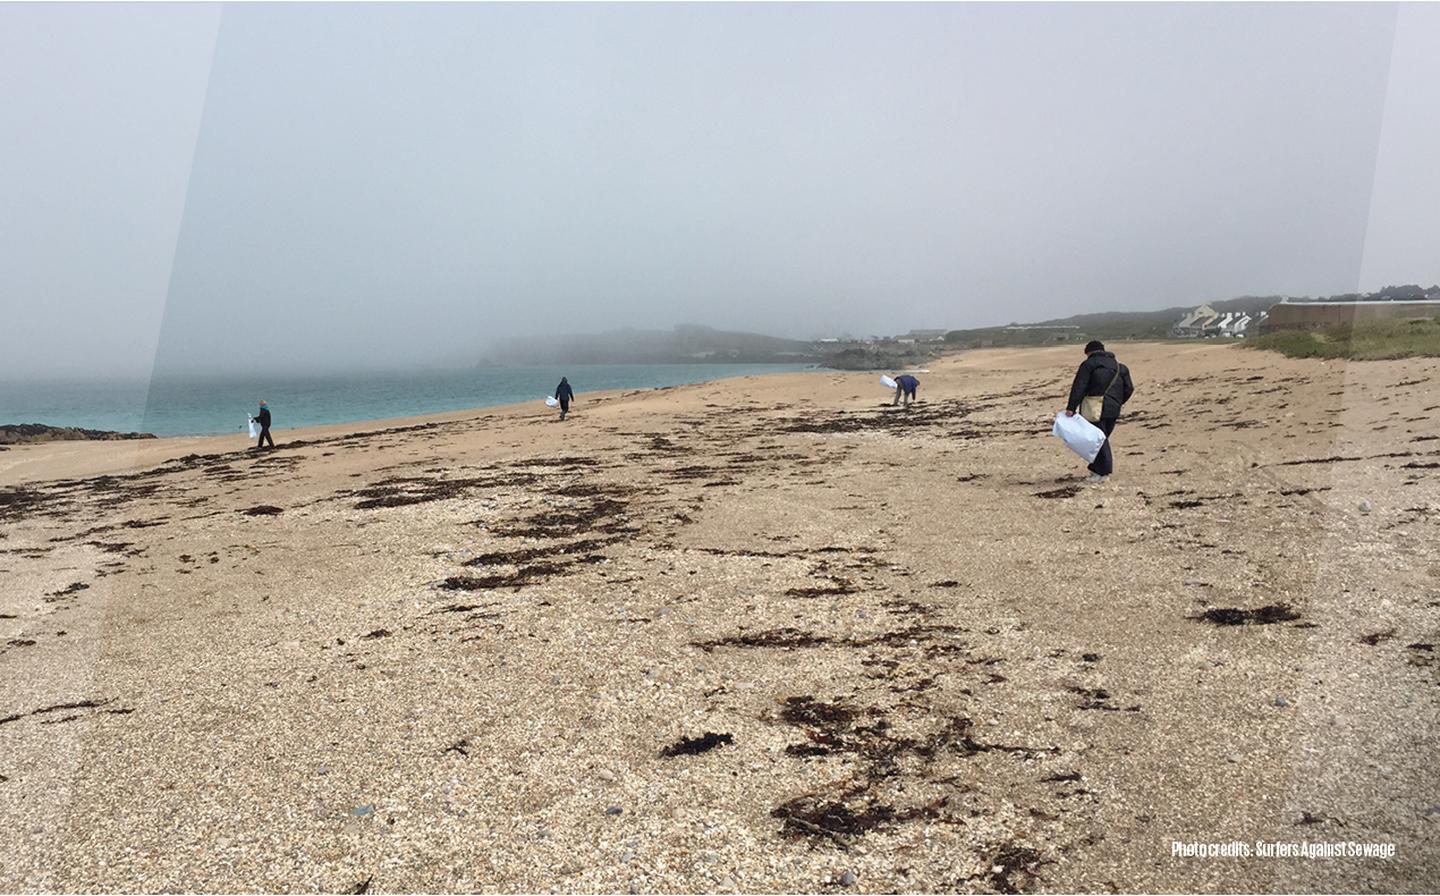 Litter pickers trying to clear our UK beaches from waste and discarded litter